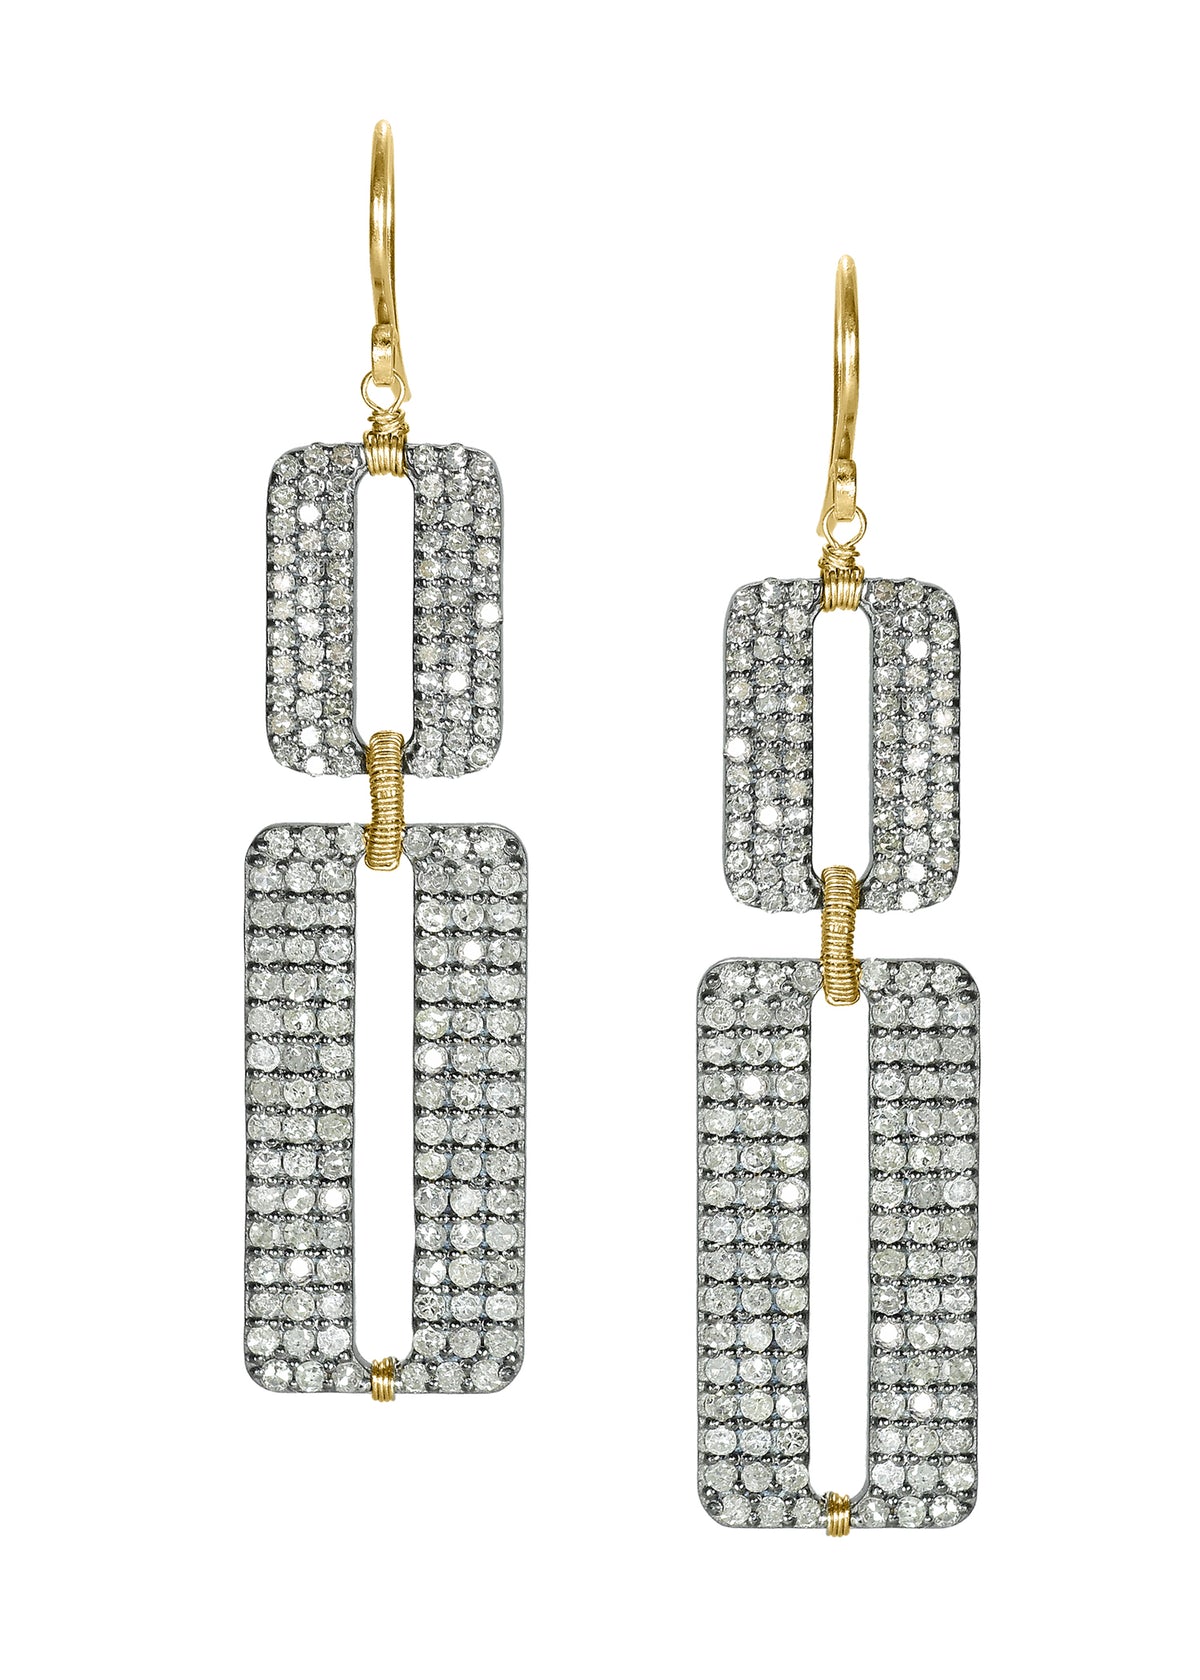 Diamond 14k gold Sterling silver Mixed metal Special order only Earrings measure 2-1/8&quot; in length (including the ear wires) and 1/2&quot; in width at the widest point Handmade in our Los Angeles studio